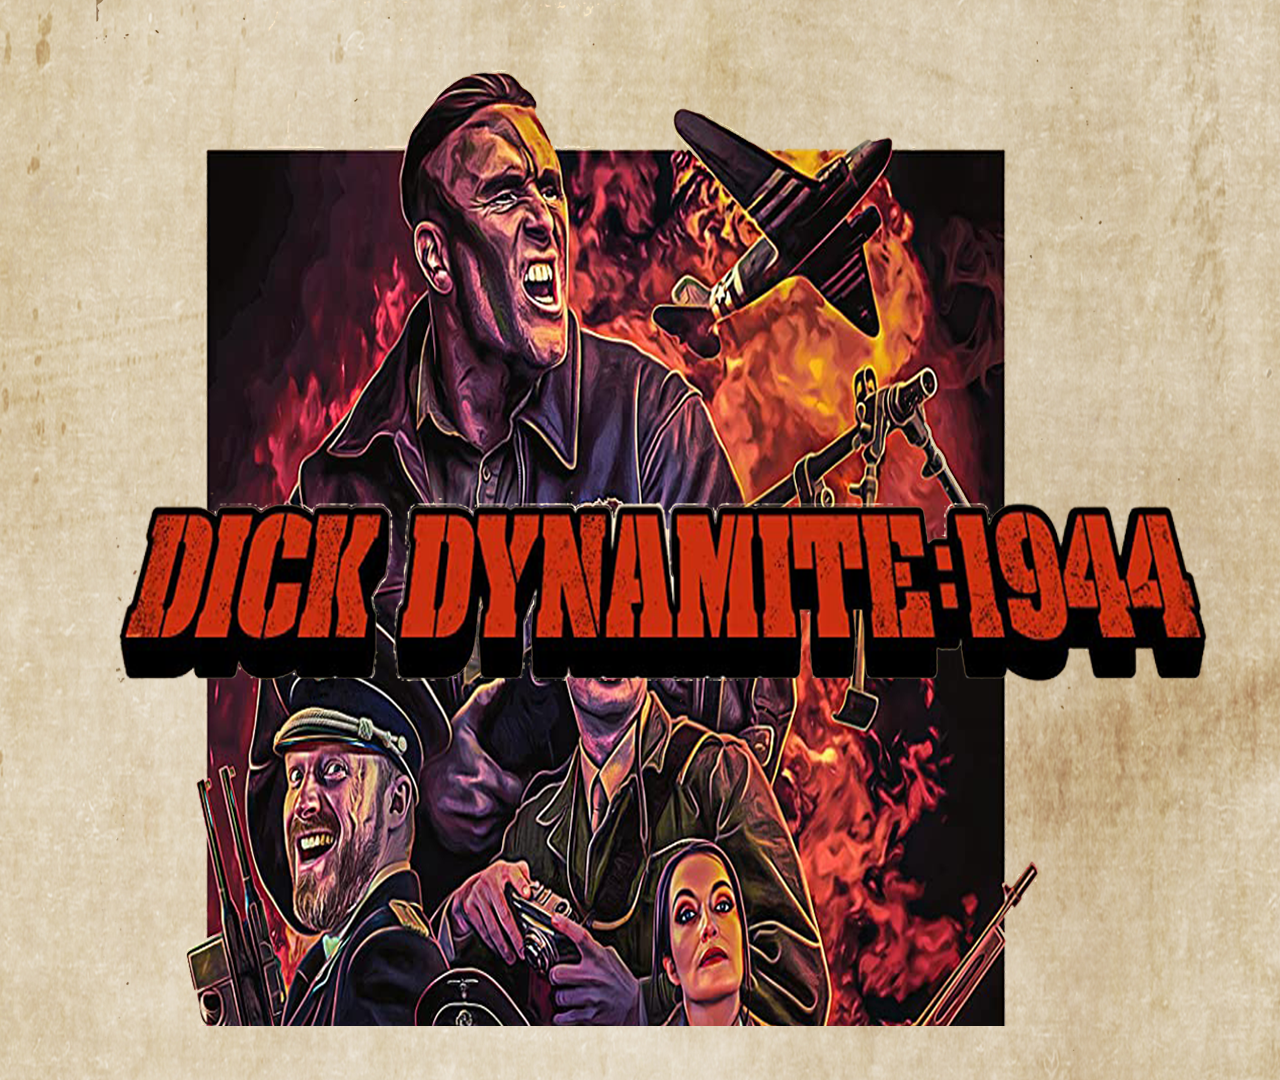 Dick Dynamite 1944 - The Game